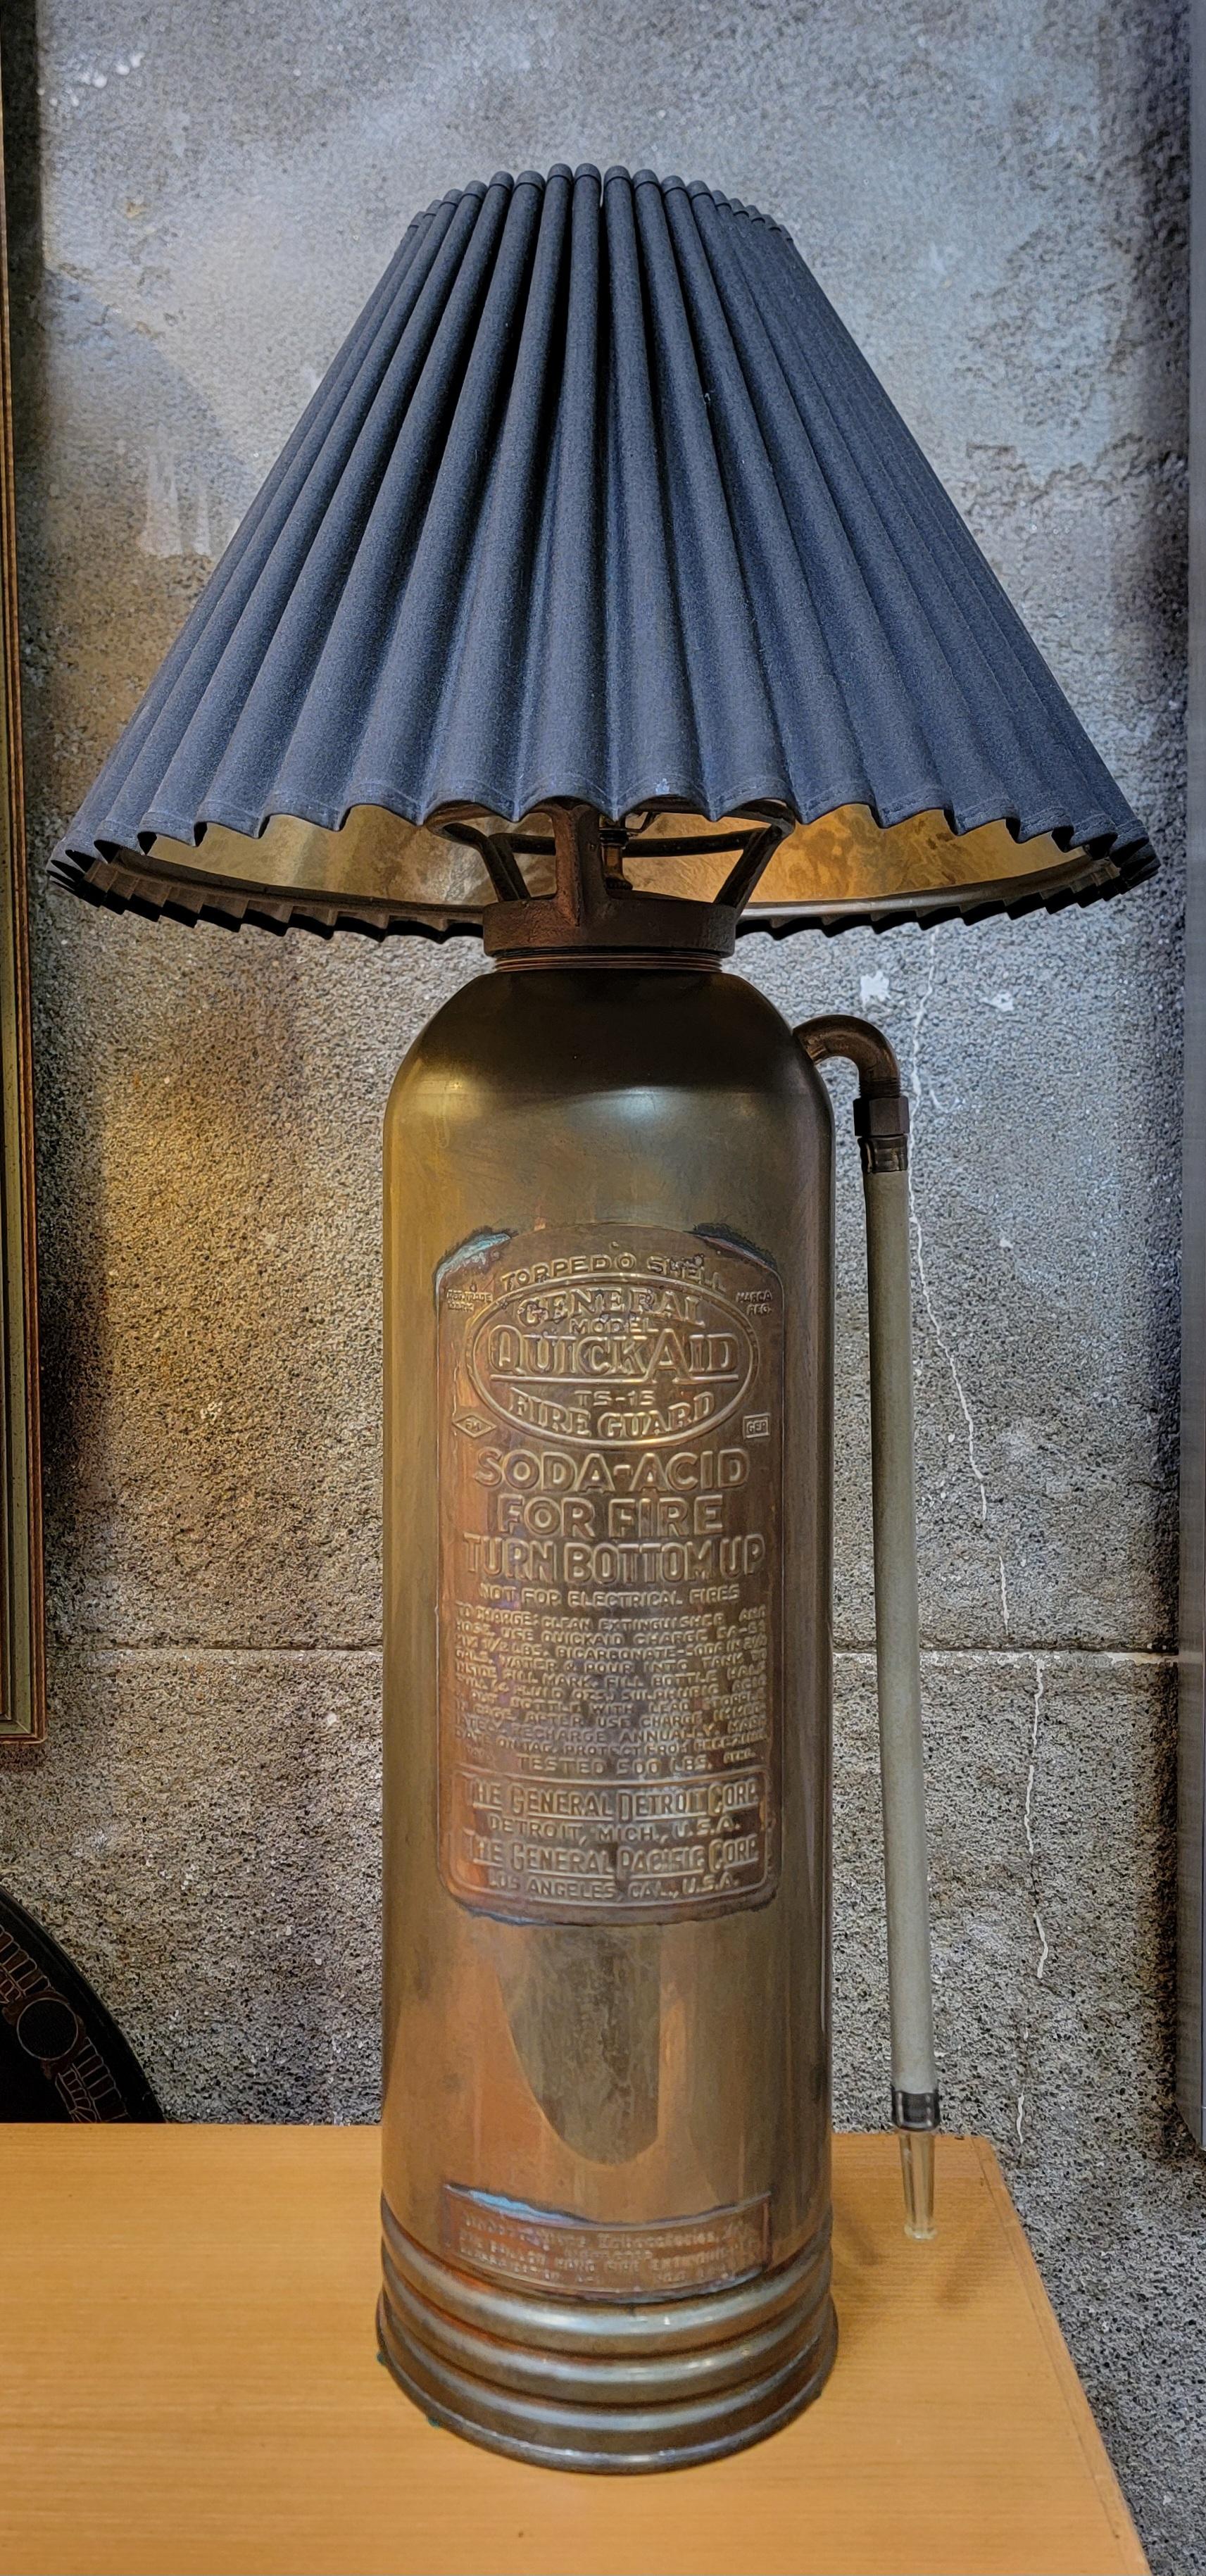 An antique brass fire extinguisher repurposed into a table lamp. Fluted shade included. Electrical socket in working order. Made by The General Pacific Corporation, Los Angeles, California. 